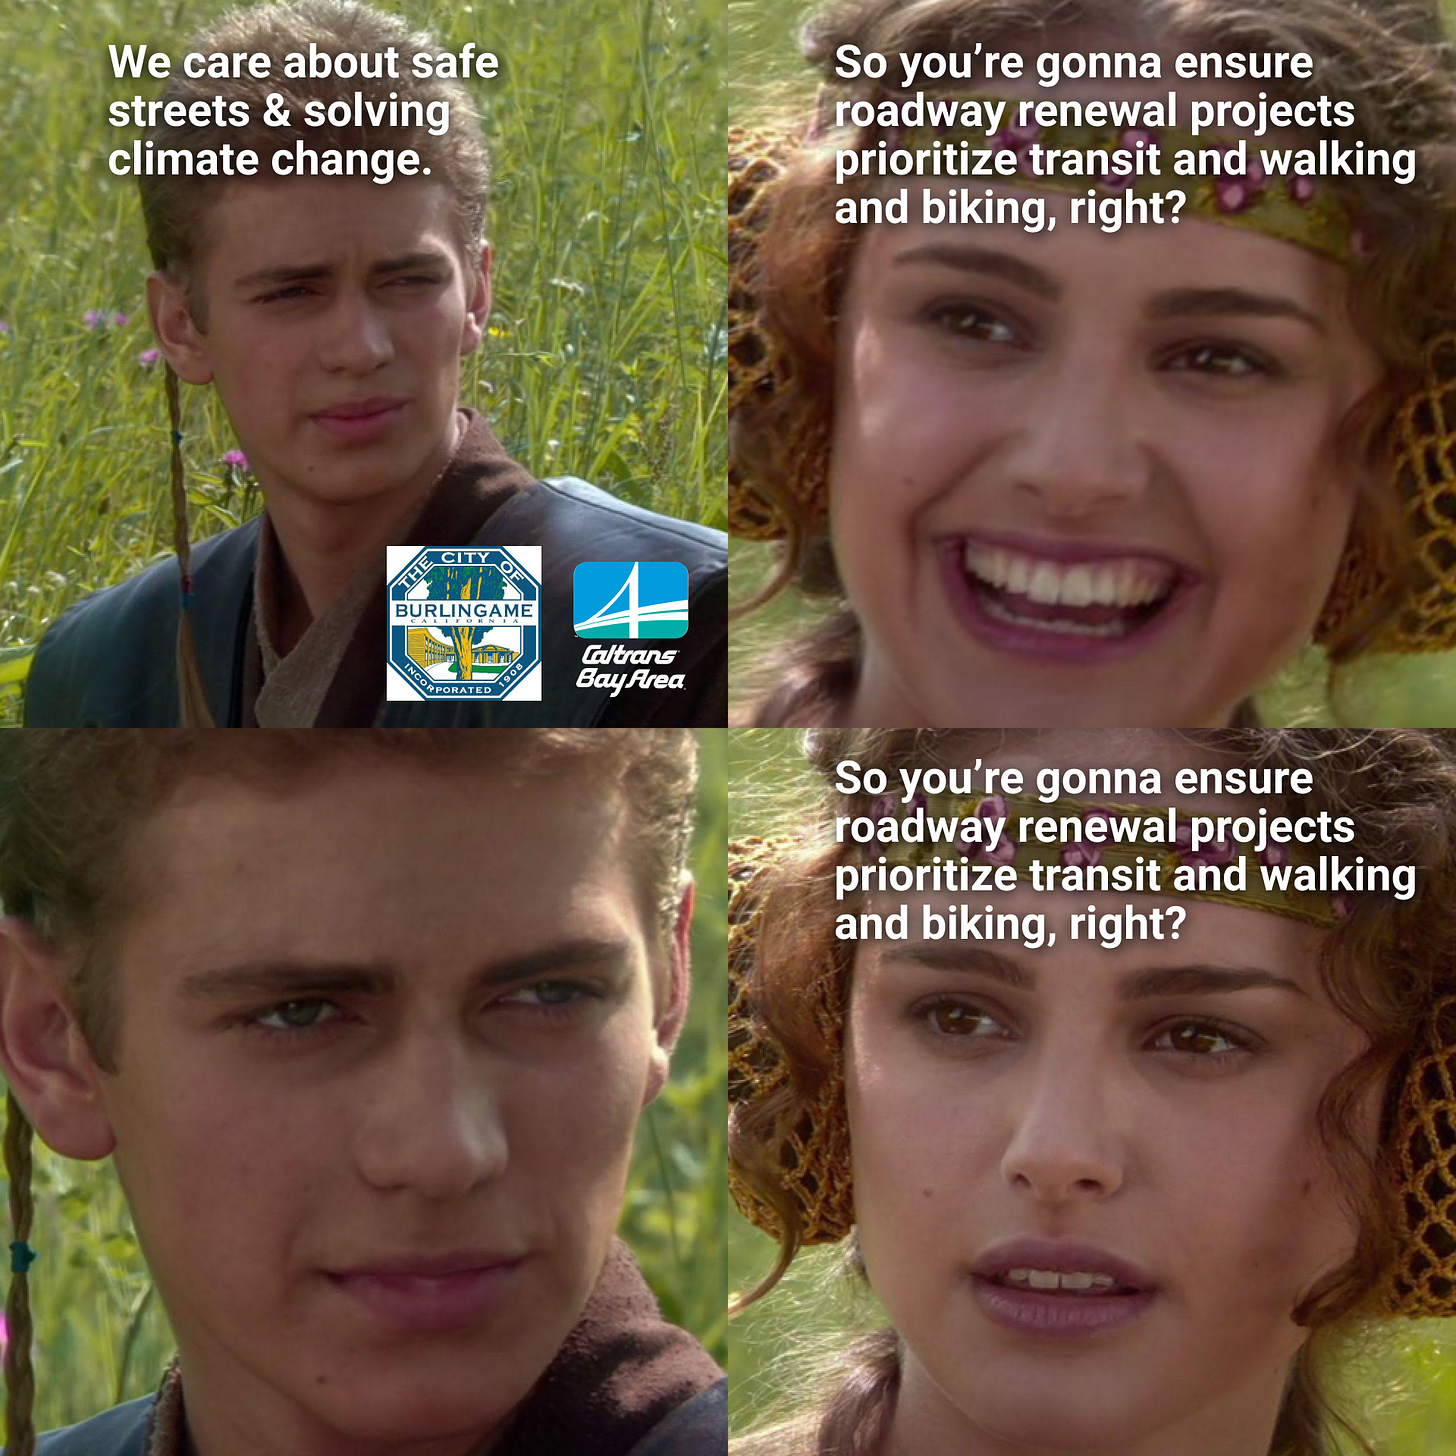 Image of the "For the better right" meme where Anakin Skywalker is portrayed as Caltrans and Burlingame saying "We care about safe steets and solving climate change" and Padme saying "So you’re gonna ensure roadway renewal projects prioritize transit and walking and biking, right?"